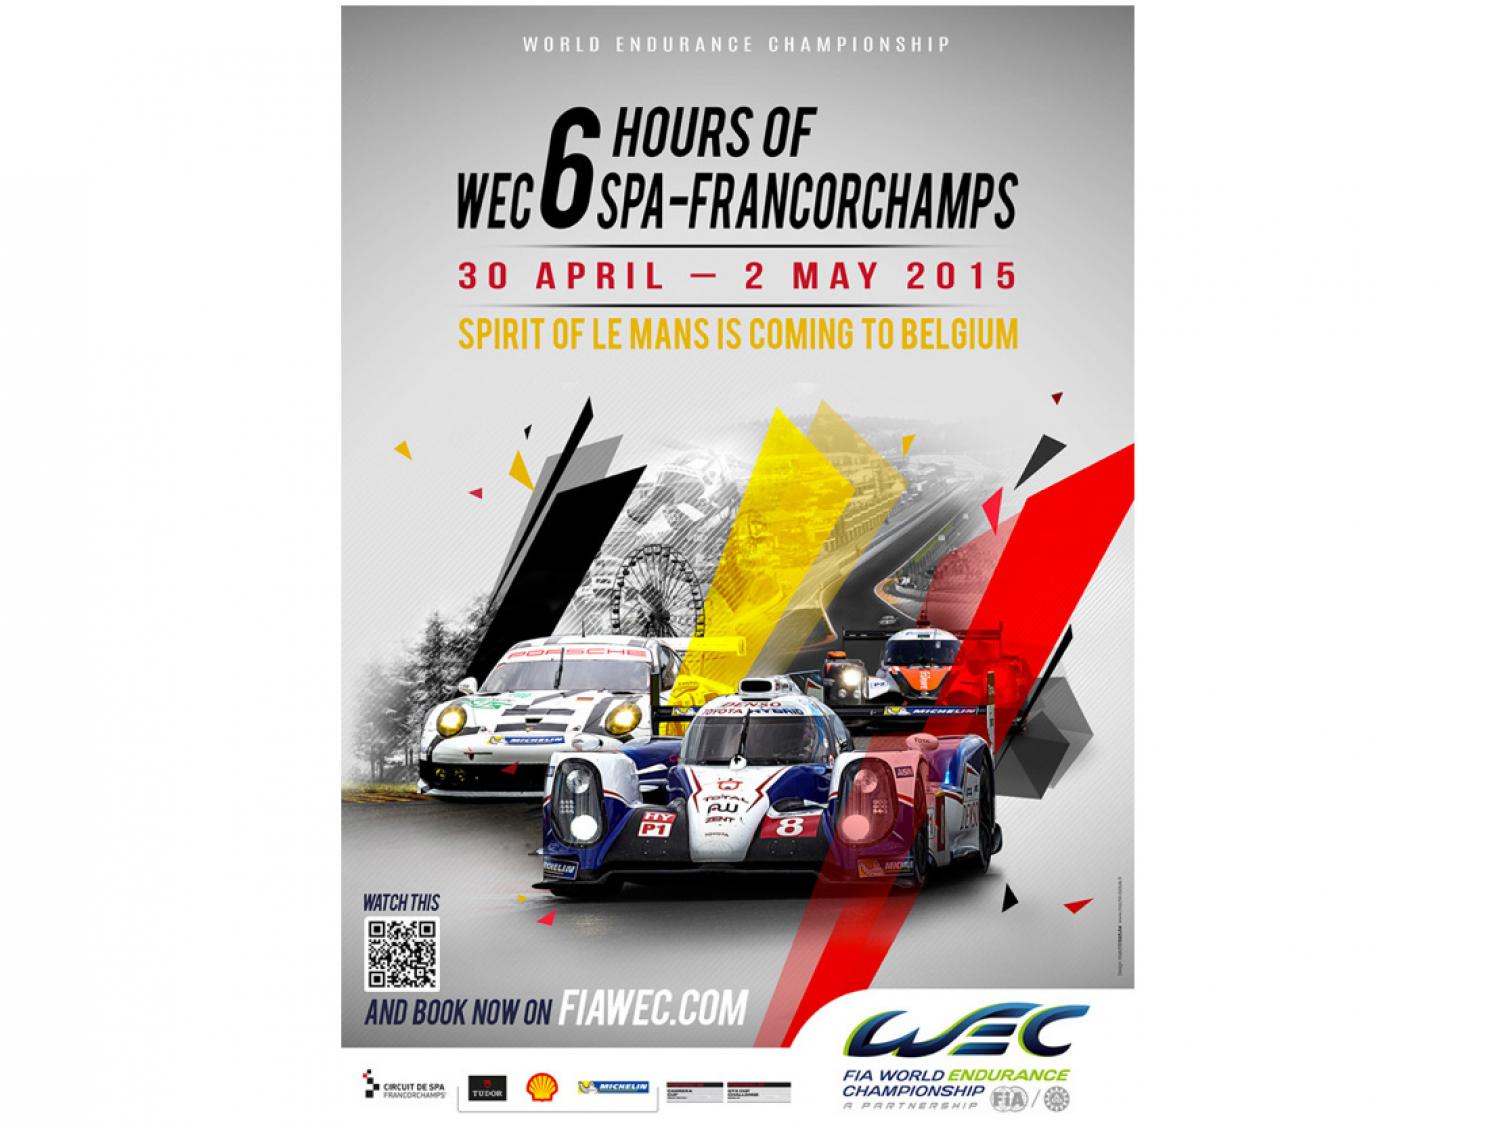 WEC Poster revealed for WEC 6 Hours of SpaFrancorchamps